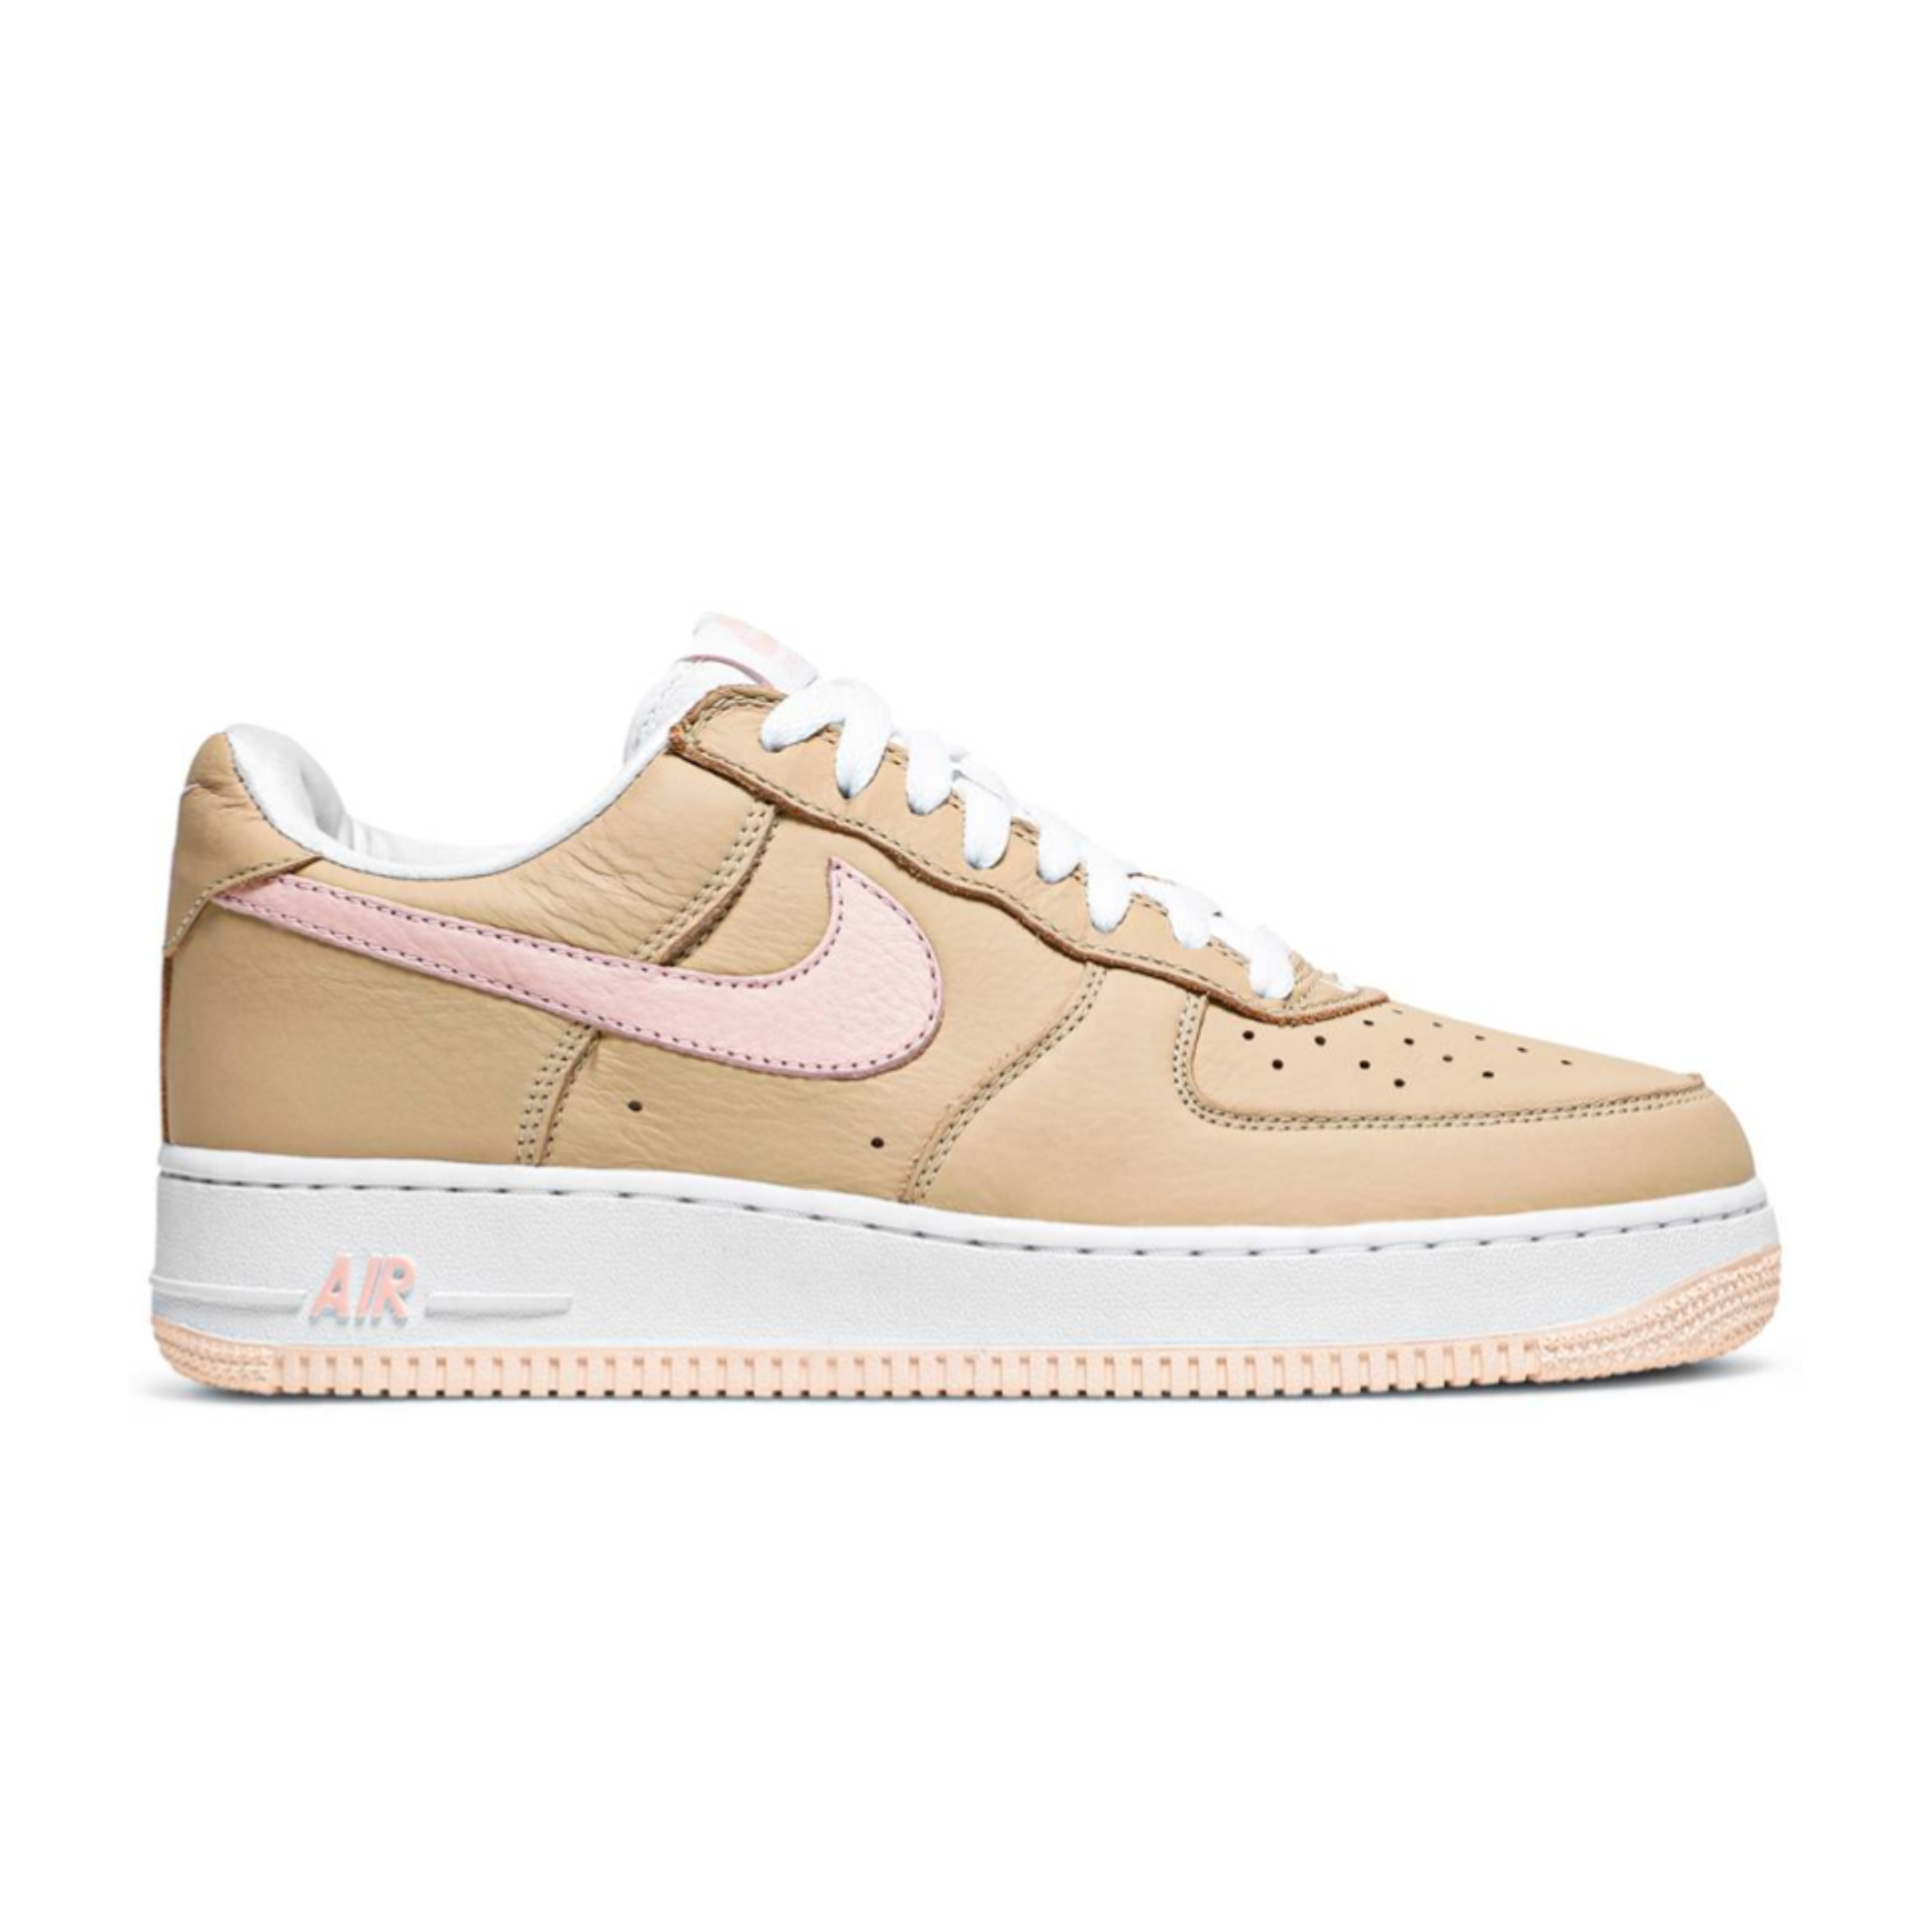 Nike Kith x Air Force 1 Low Retro 'Linen'